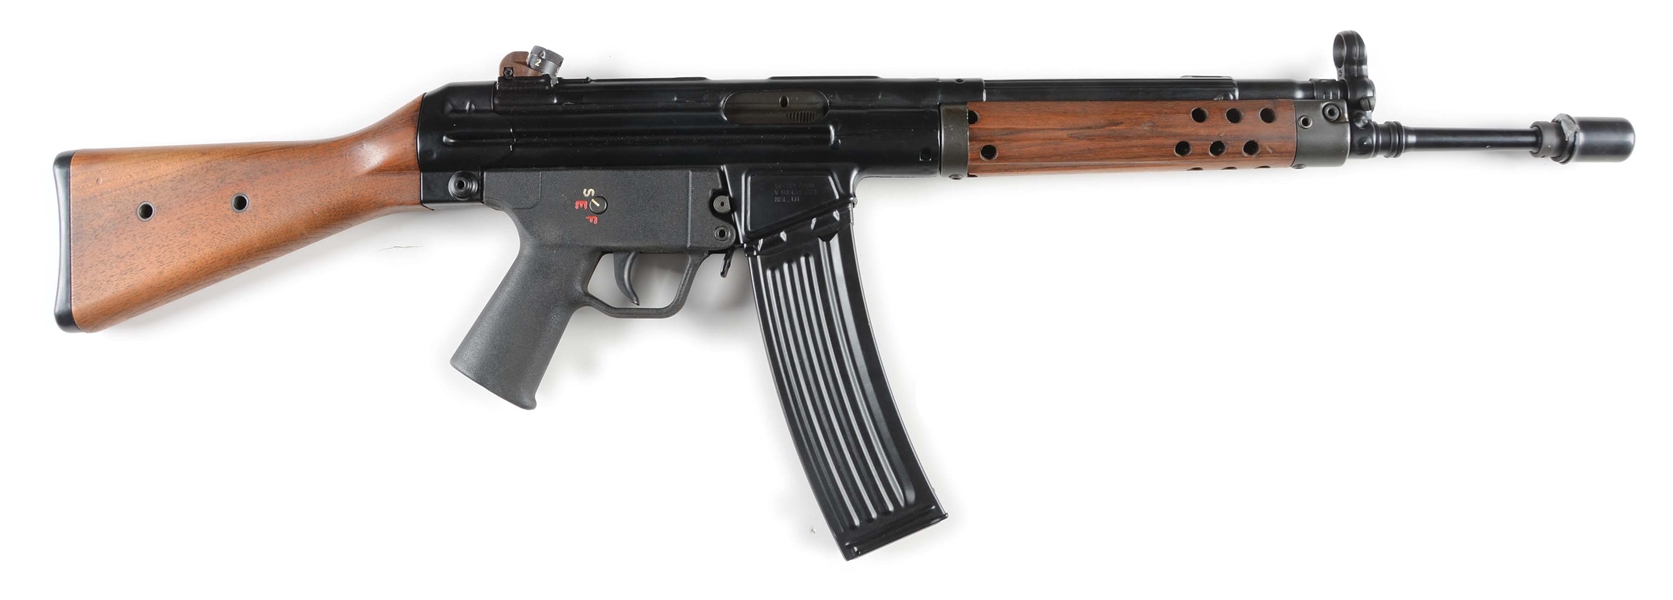 (M) VECTOR ARMS V-93 SEMI-AUTOMATIC RIFLE.